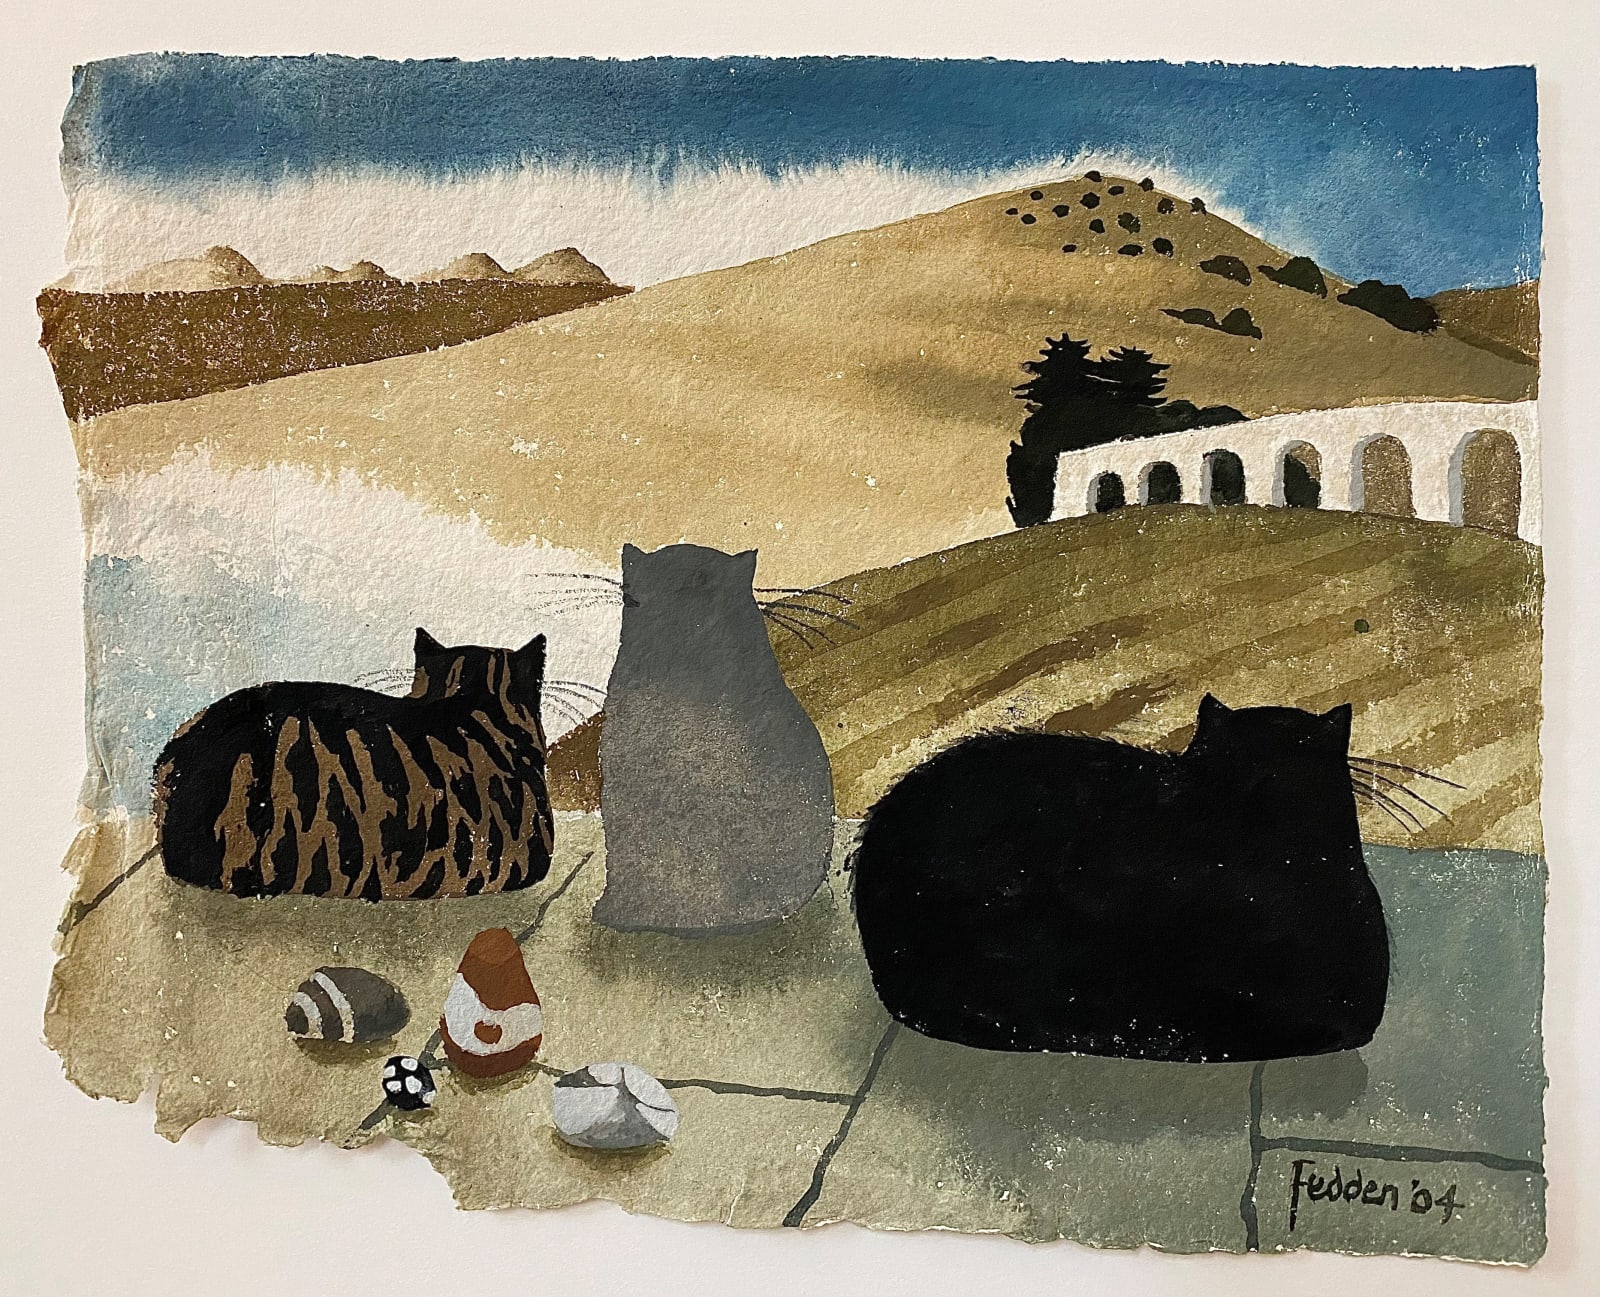 Mary Fedden, Cats in a landscape, 2004